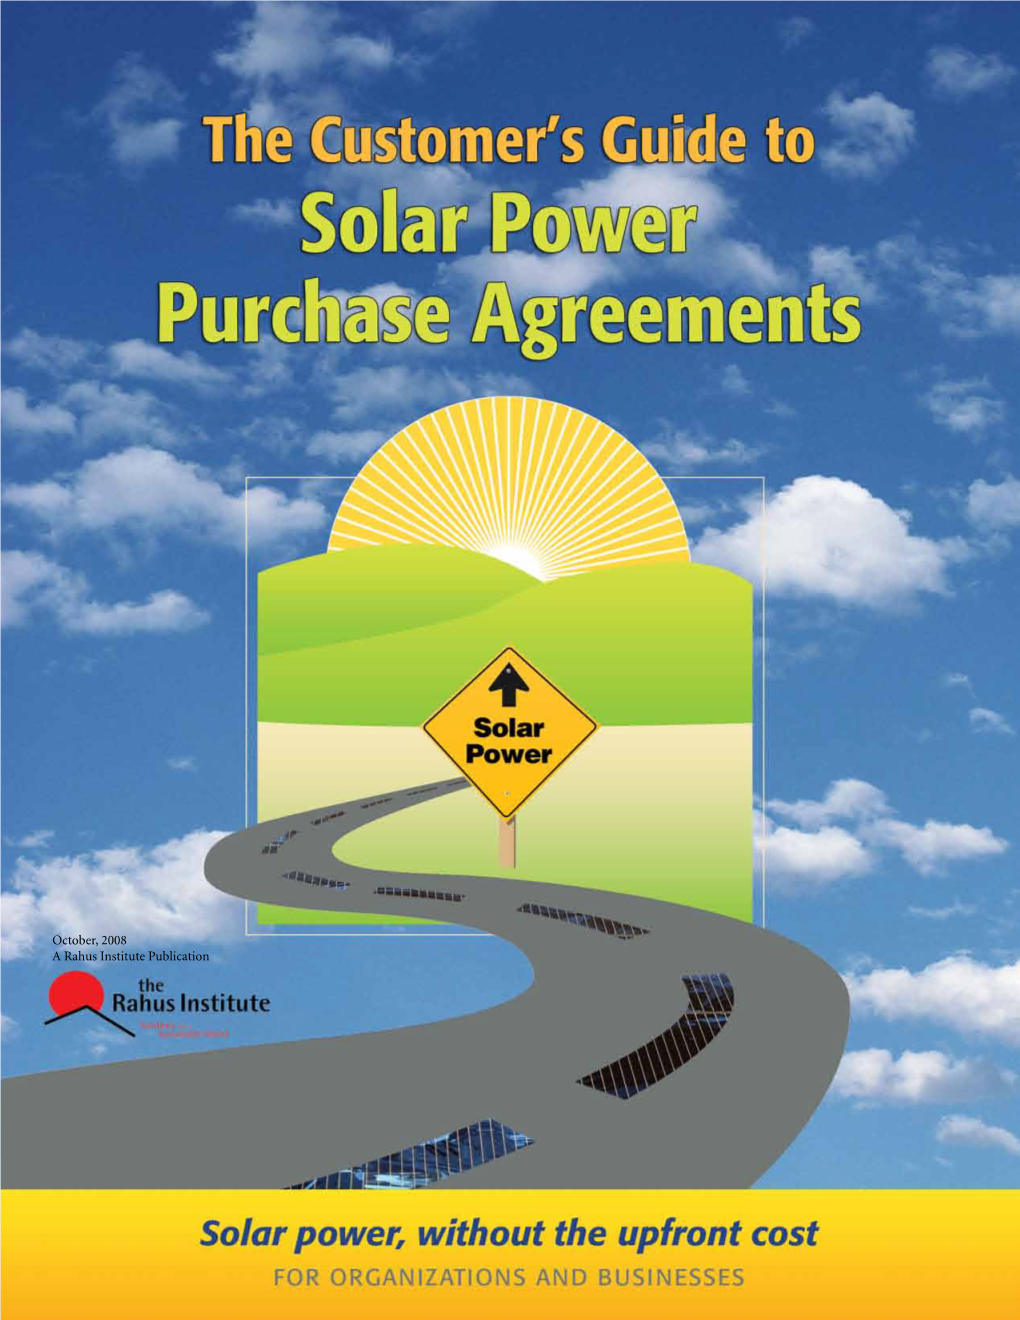 The Customer's Guide to Solar Power Purchase Agreements